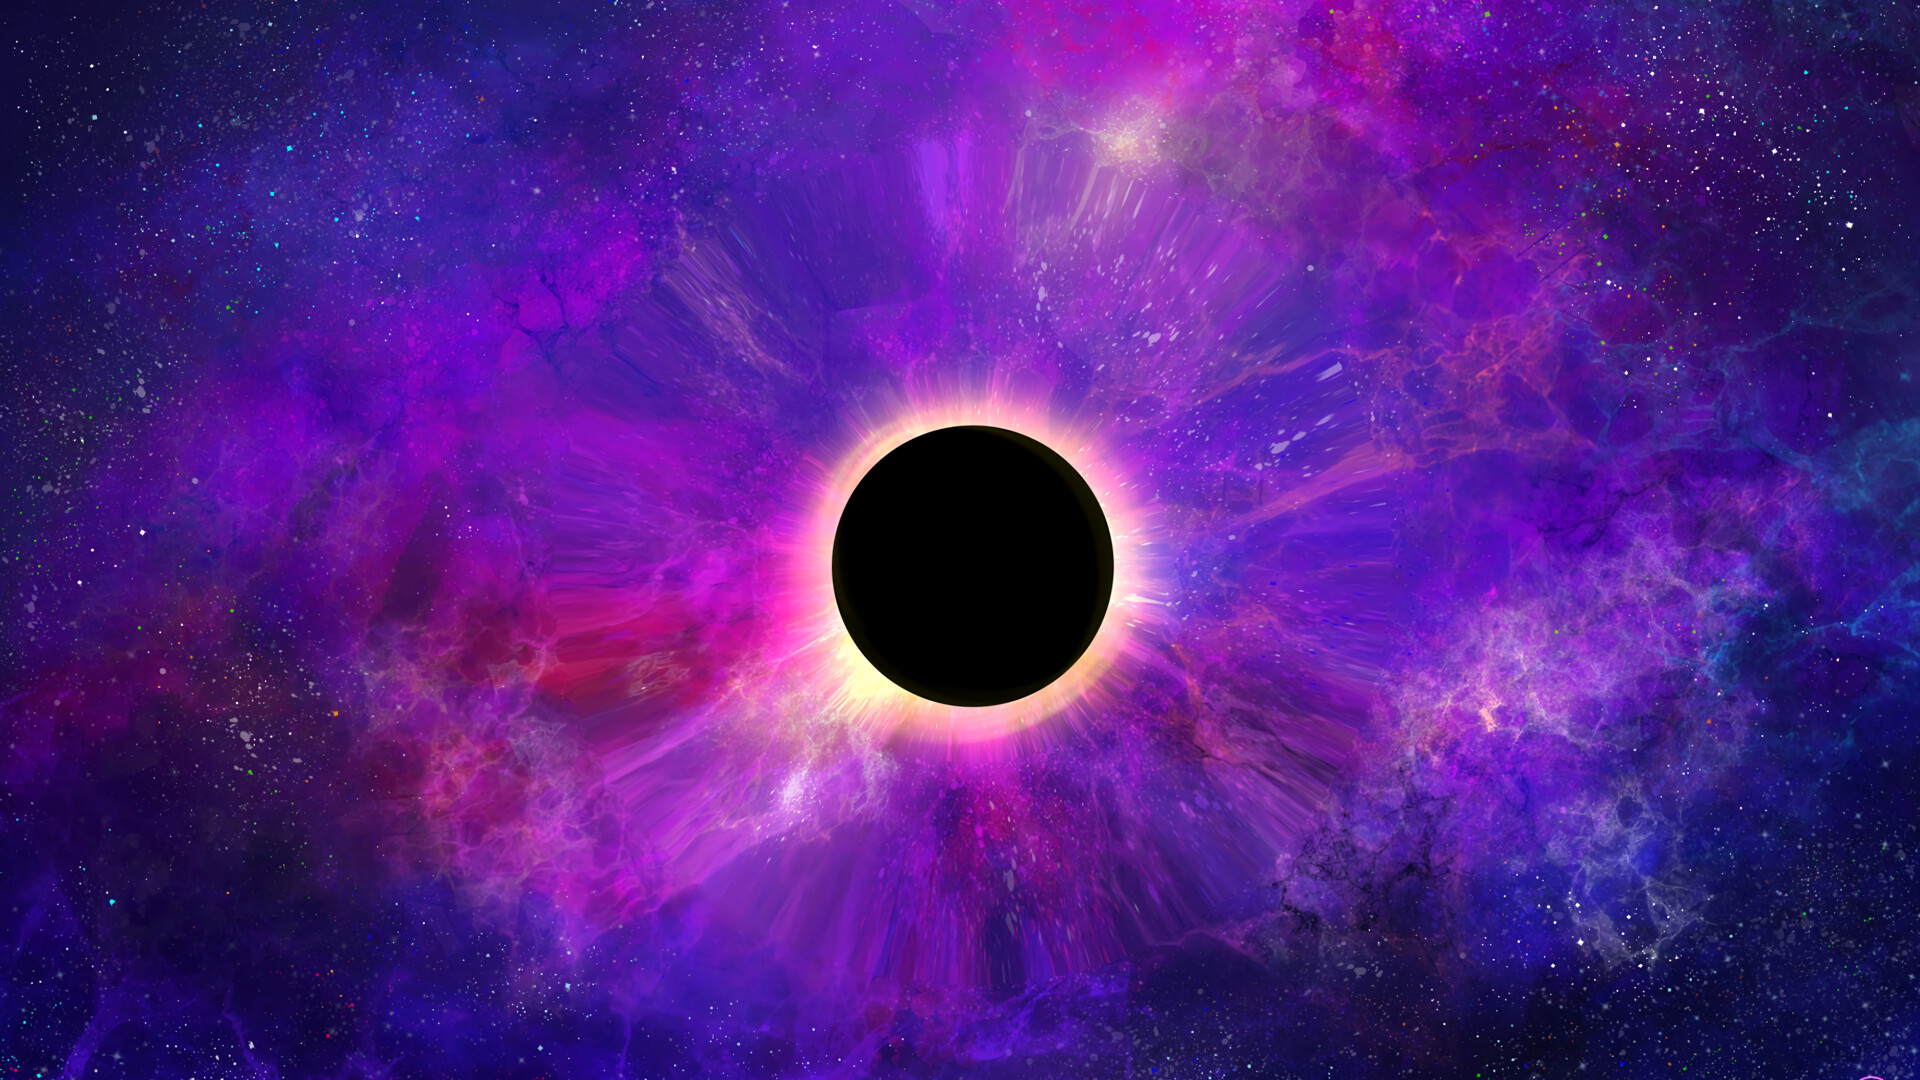 Black Hole: Regions of spacetime from which nothing, not even light, can escape. 1920x1080 Full HD Wallpaper.